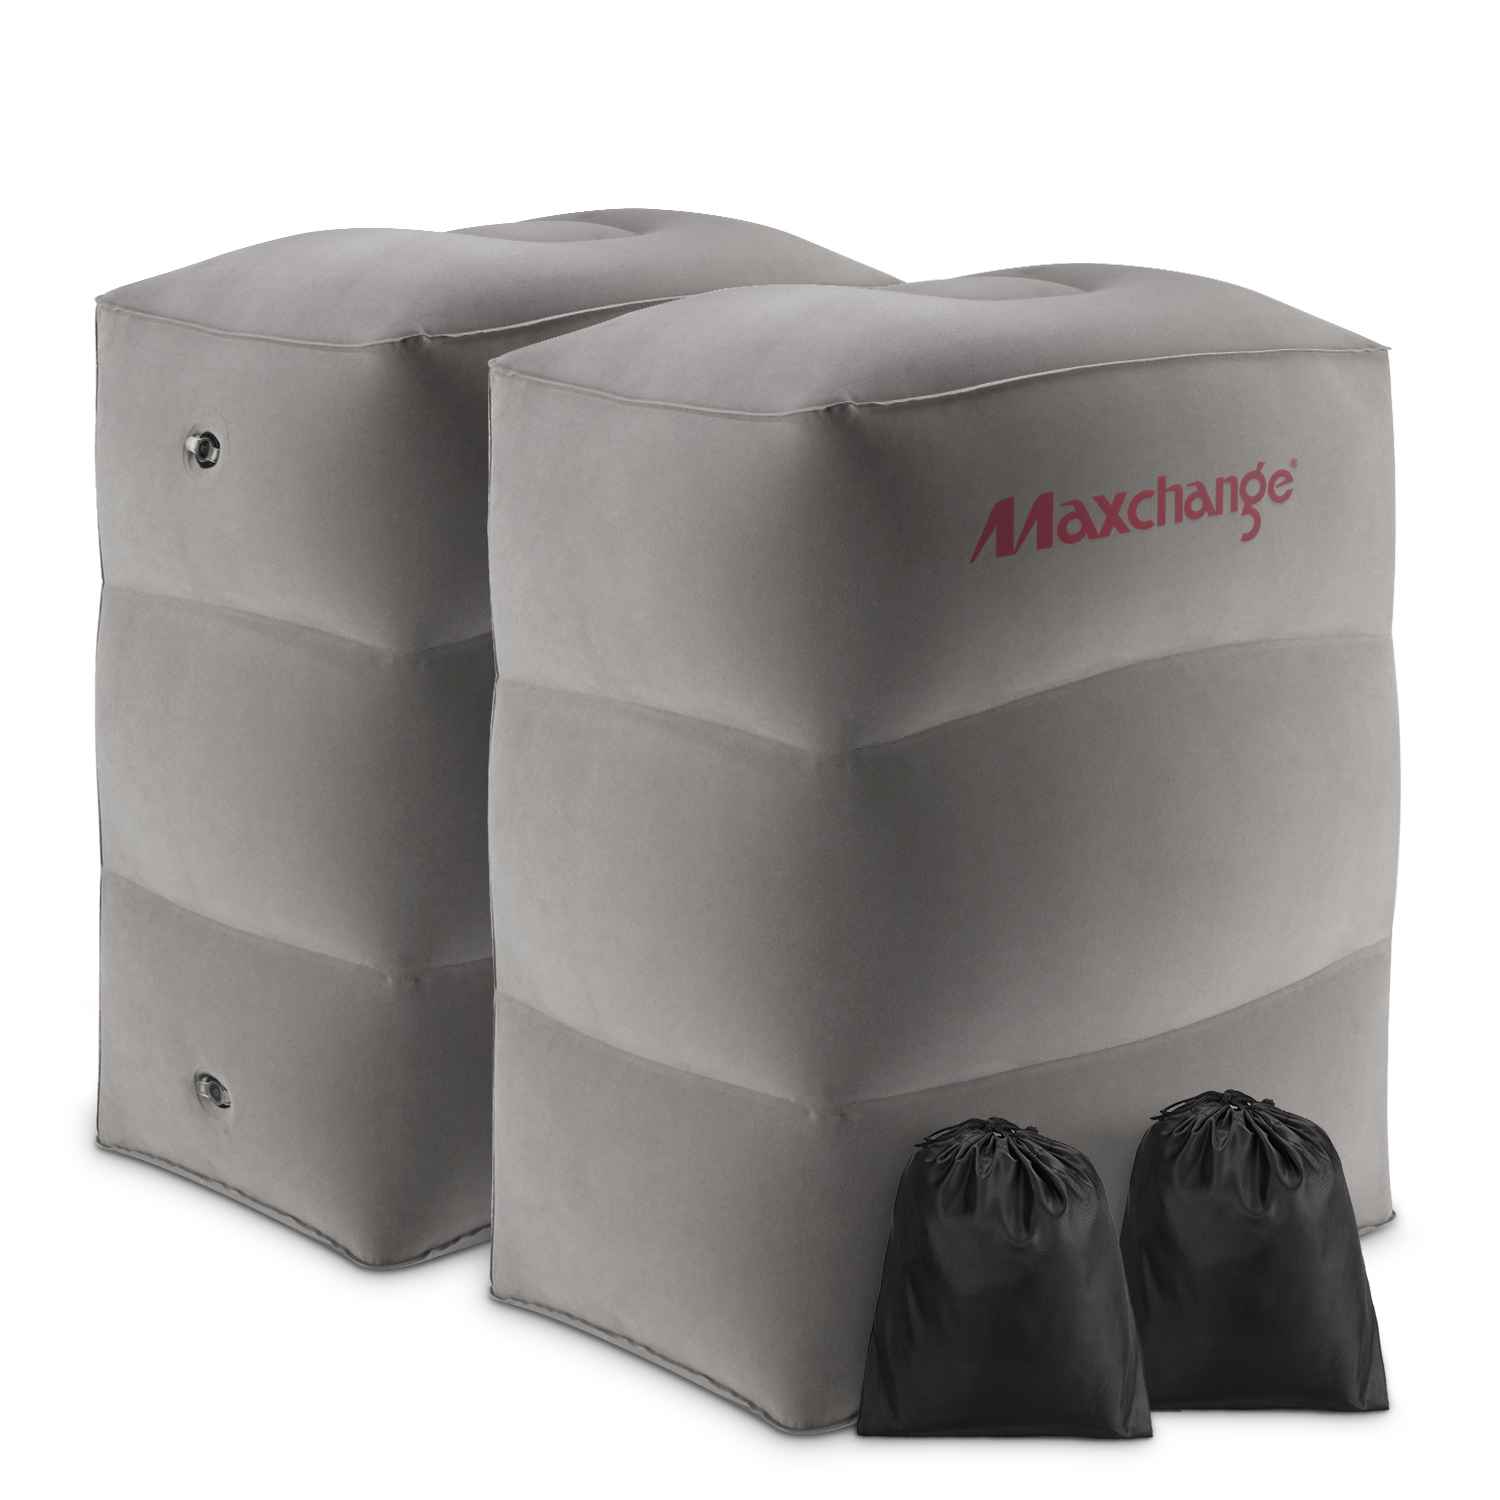 Maliton Inflatable Travel Foot Rest Pillow - Maliton